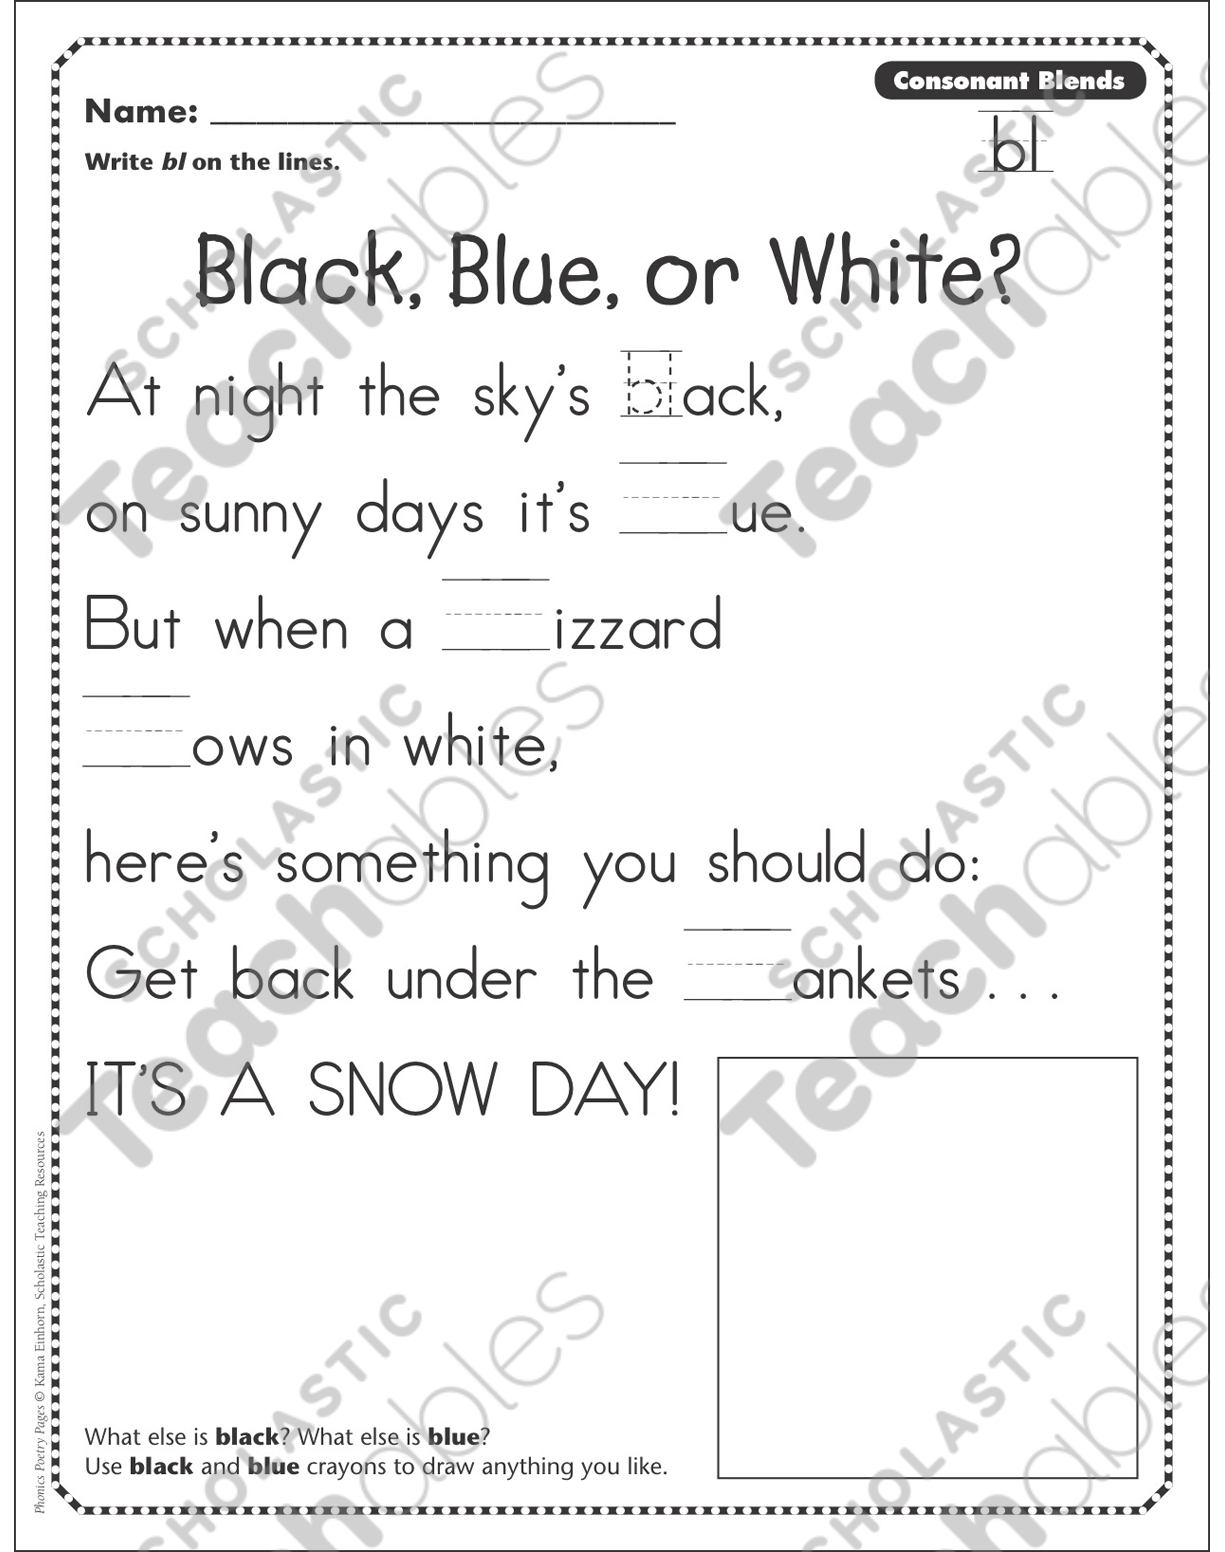 Black Blue Or White Consonant Blends Bl Phonics Poetry Page Printable Skills Sheets